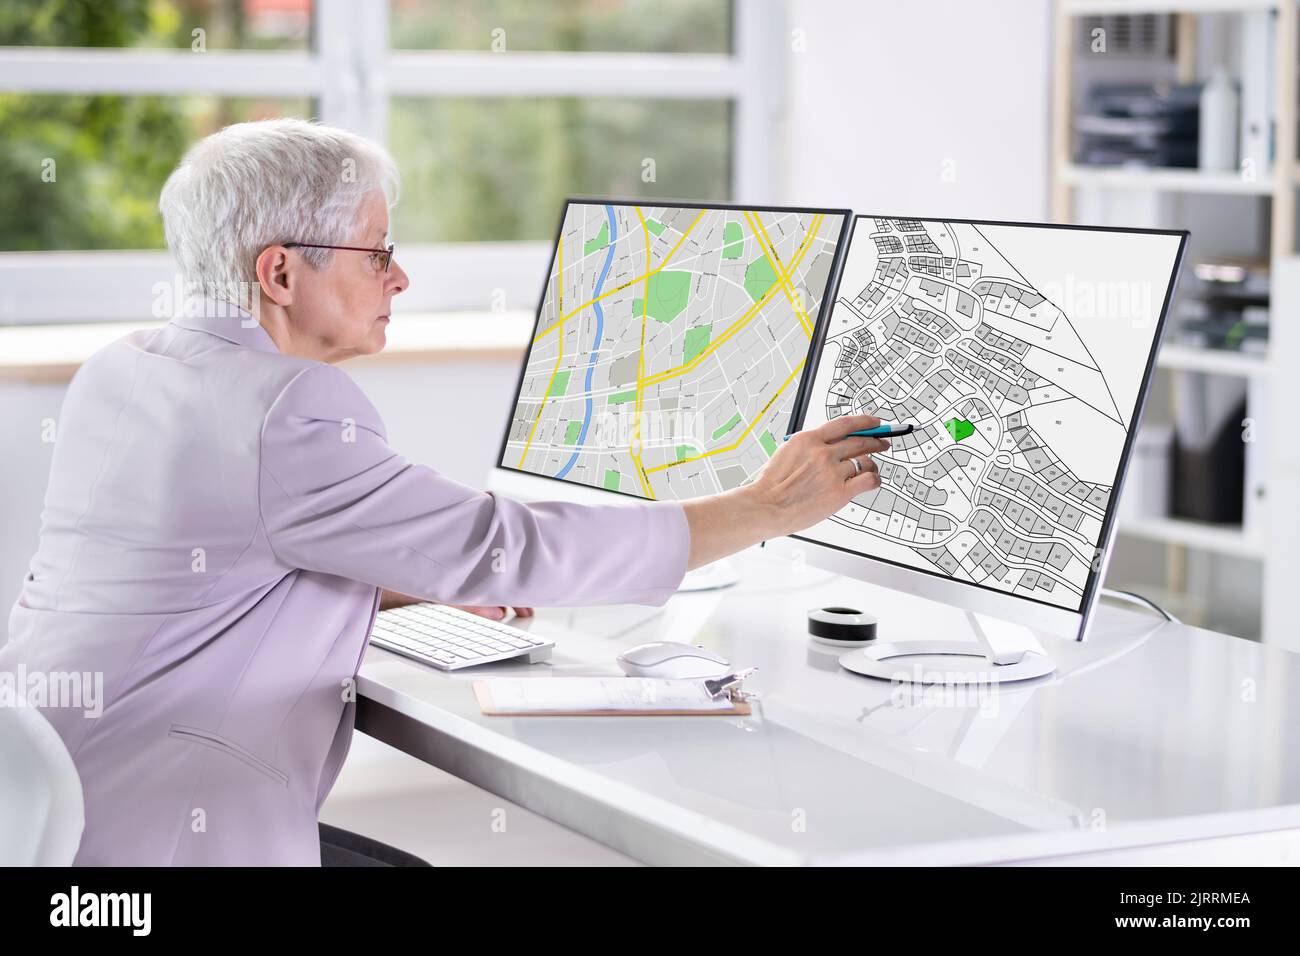 Businessperson Analyzing Cadastre Map On Computer In The Office Stock Photo